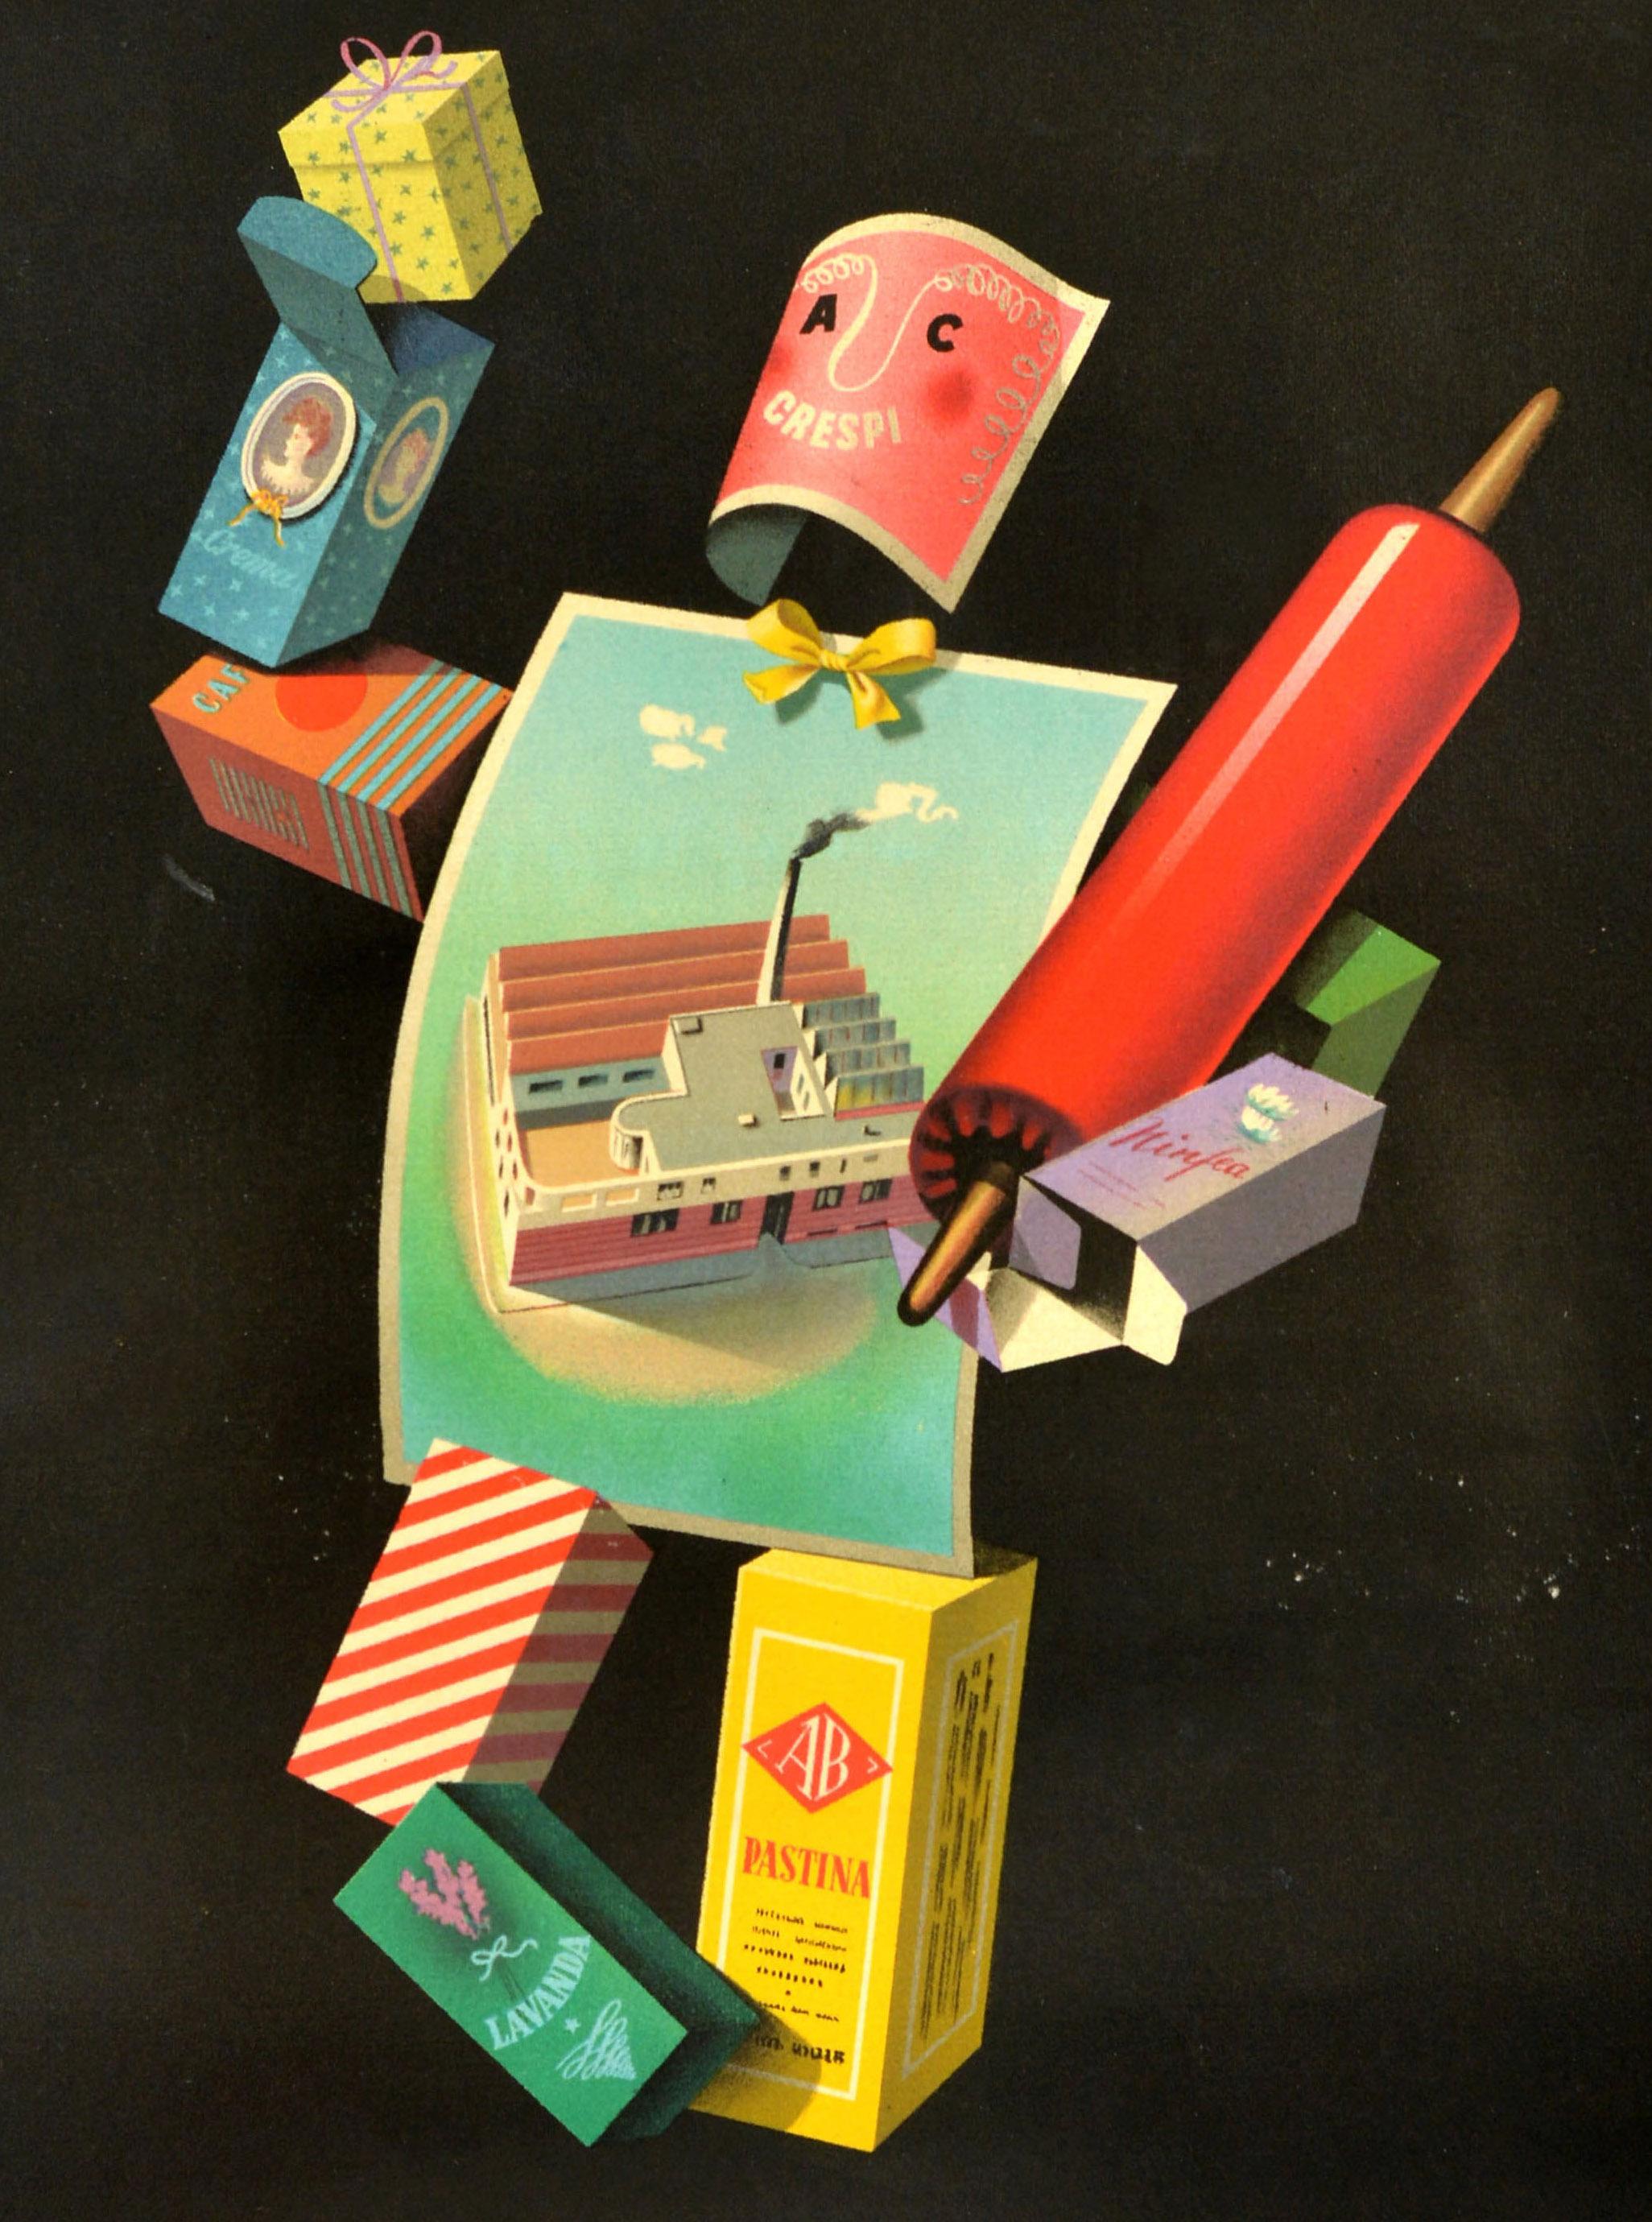 Original vintage advertising poster - per la confezione fine Industrie Grafiche Crespi Vigevano Telef. 3272 / Graphic Industries for fine packaging - featuring an image of a man made out of various packing boxes holding a gift box with a ribbon on